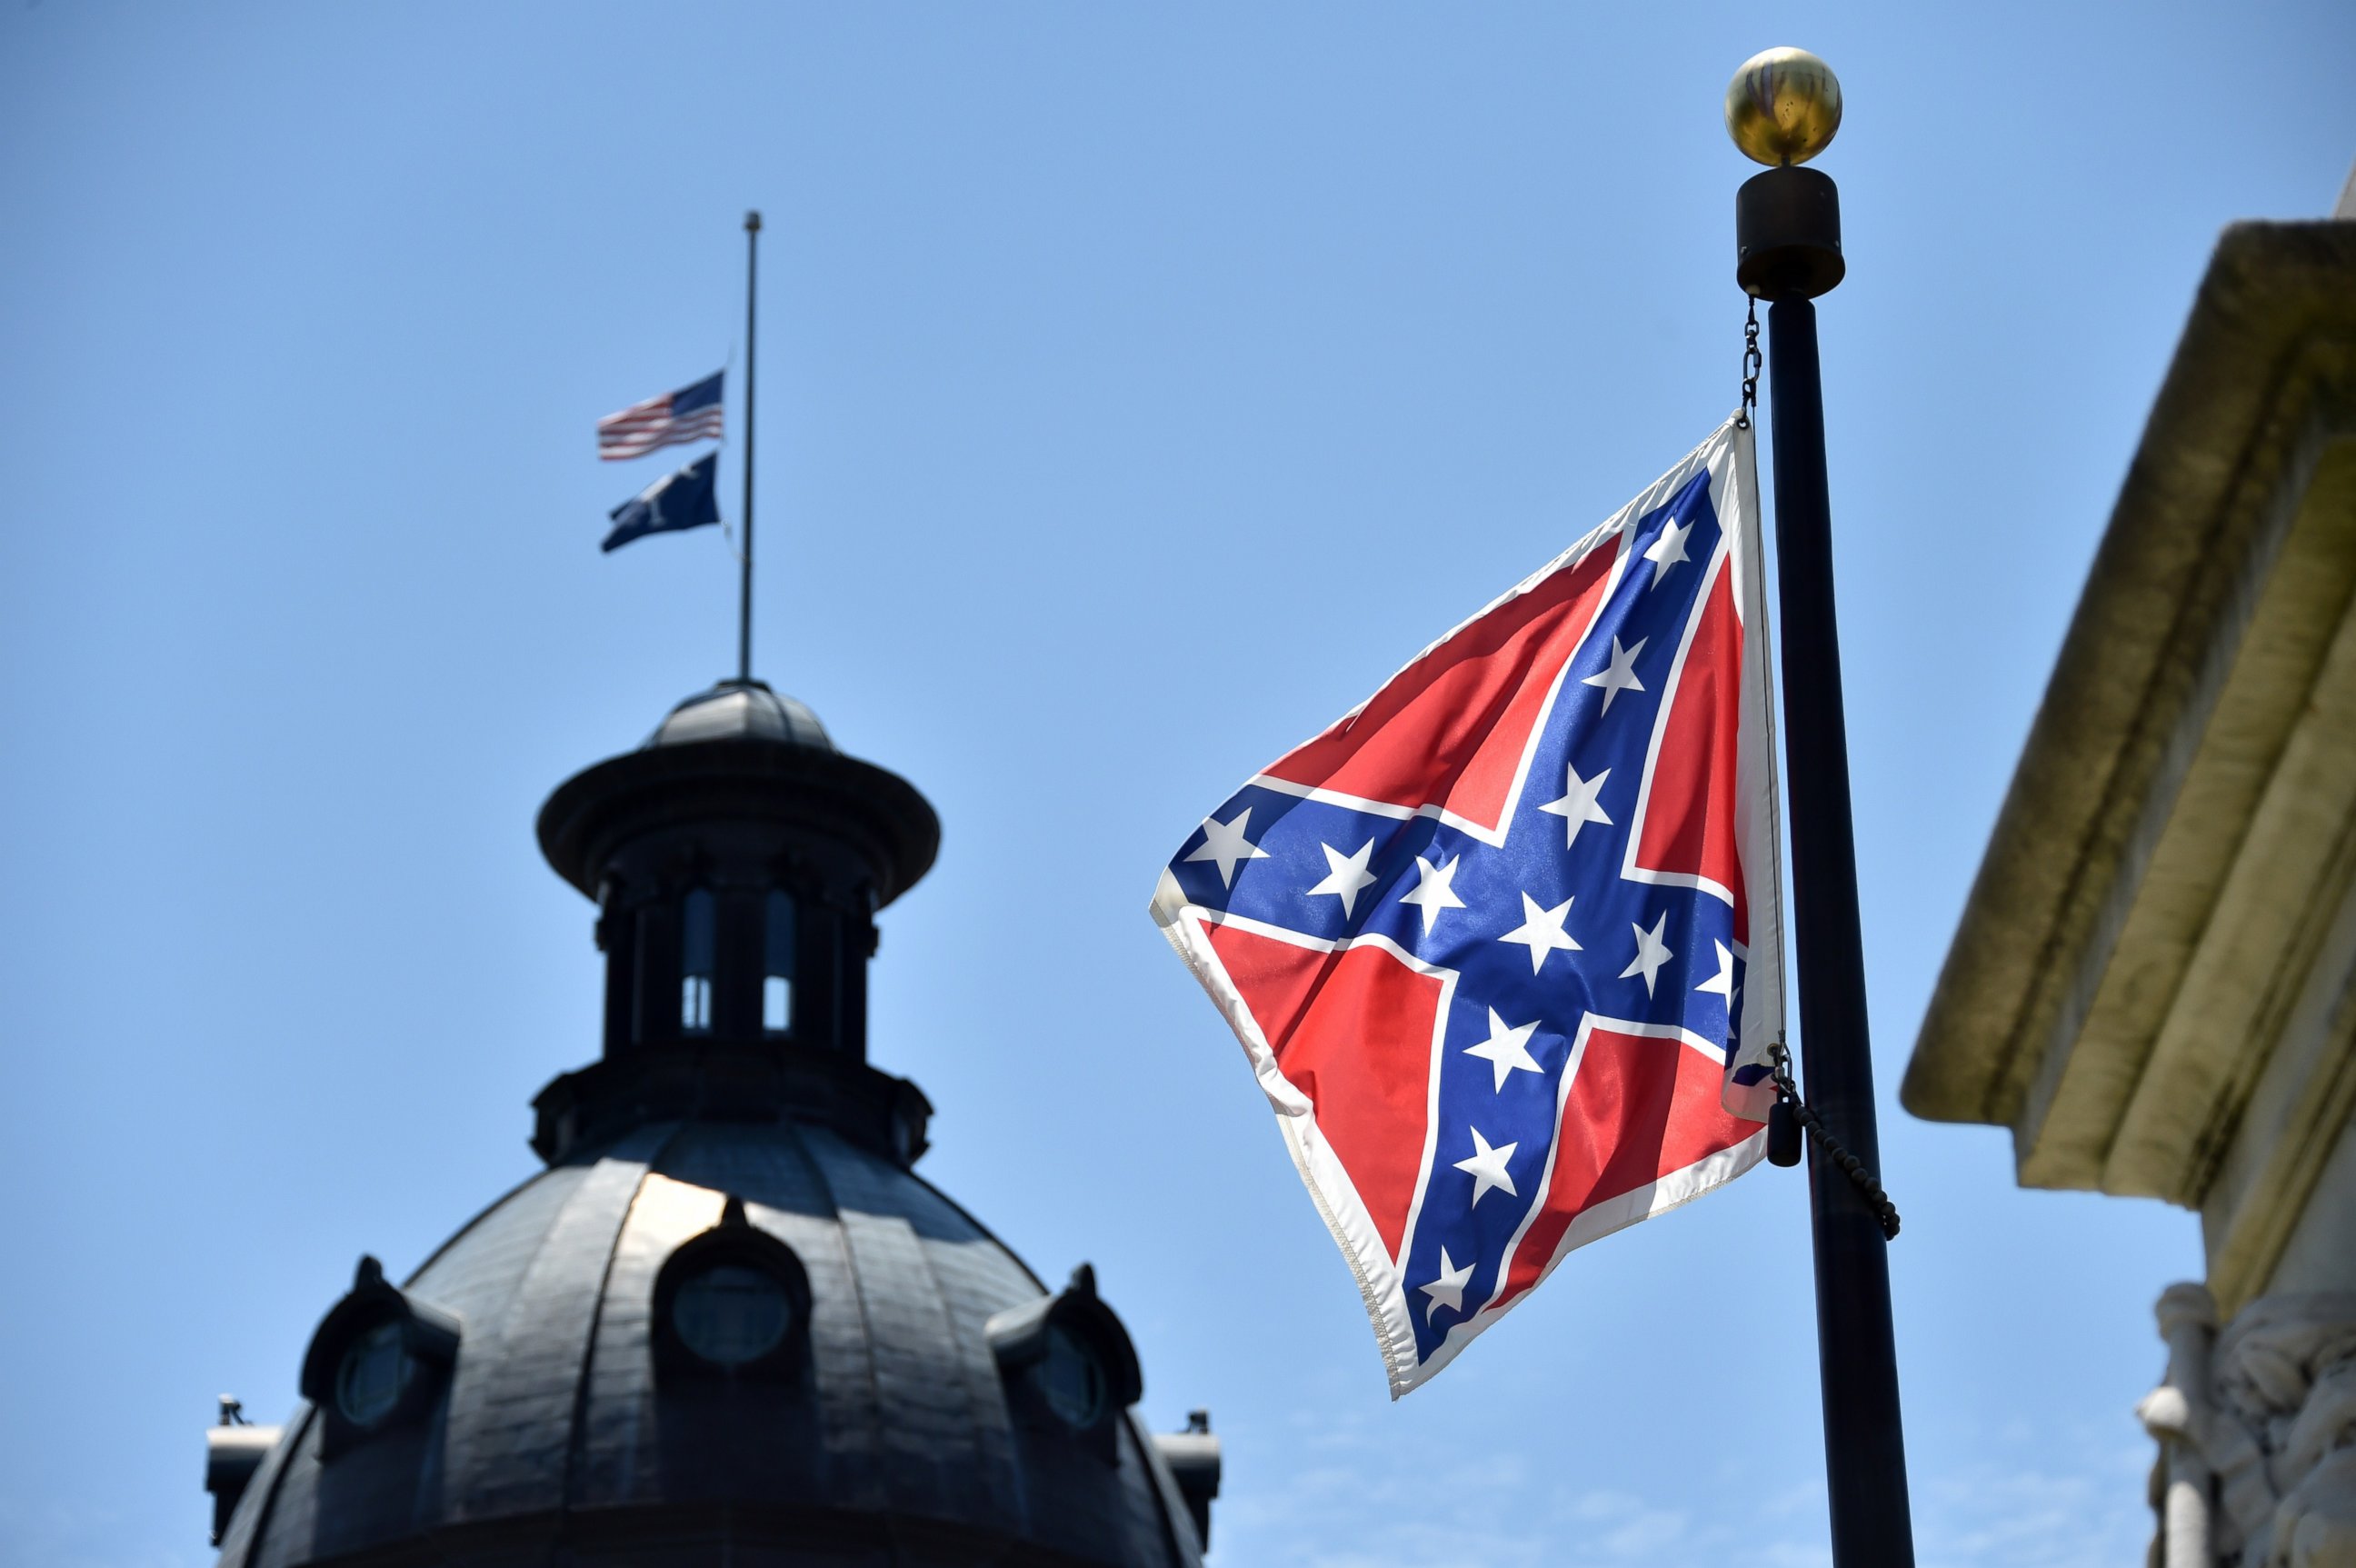 PHOTO: The South Carolina and American flags flying at half-staff behind the Confederate flag erected in front of the State Congress building in Columbia, South Carolina on June 19, 2015. 